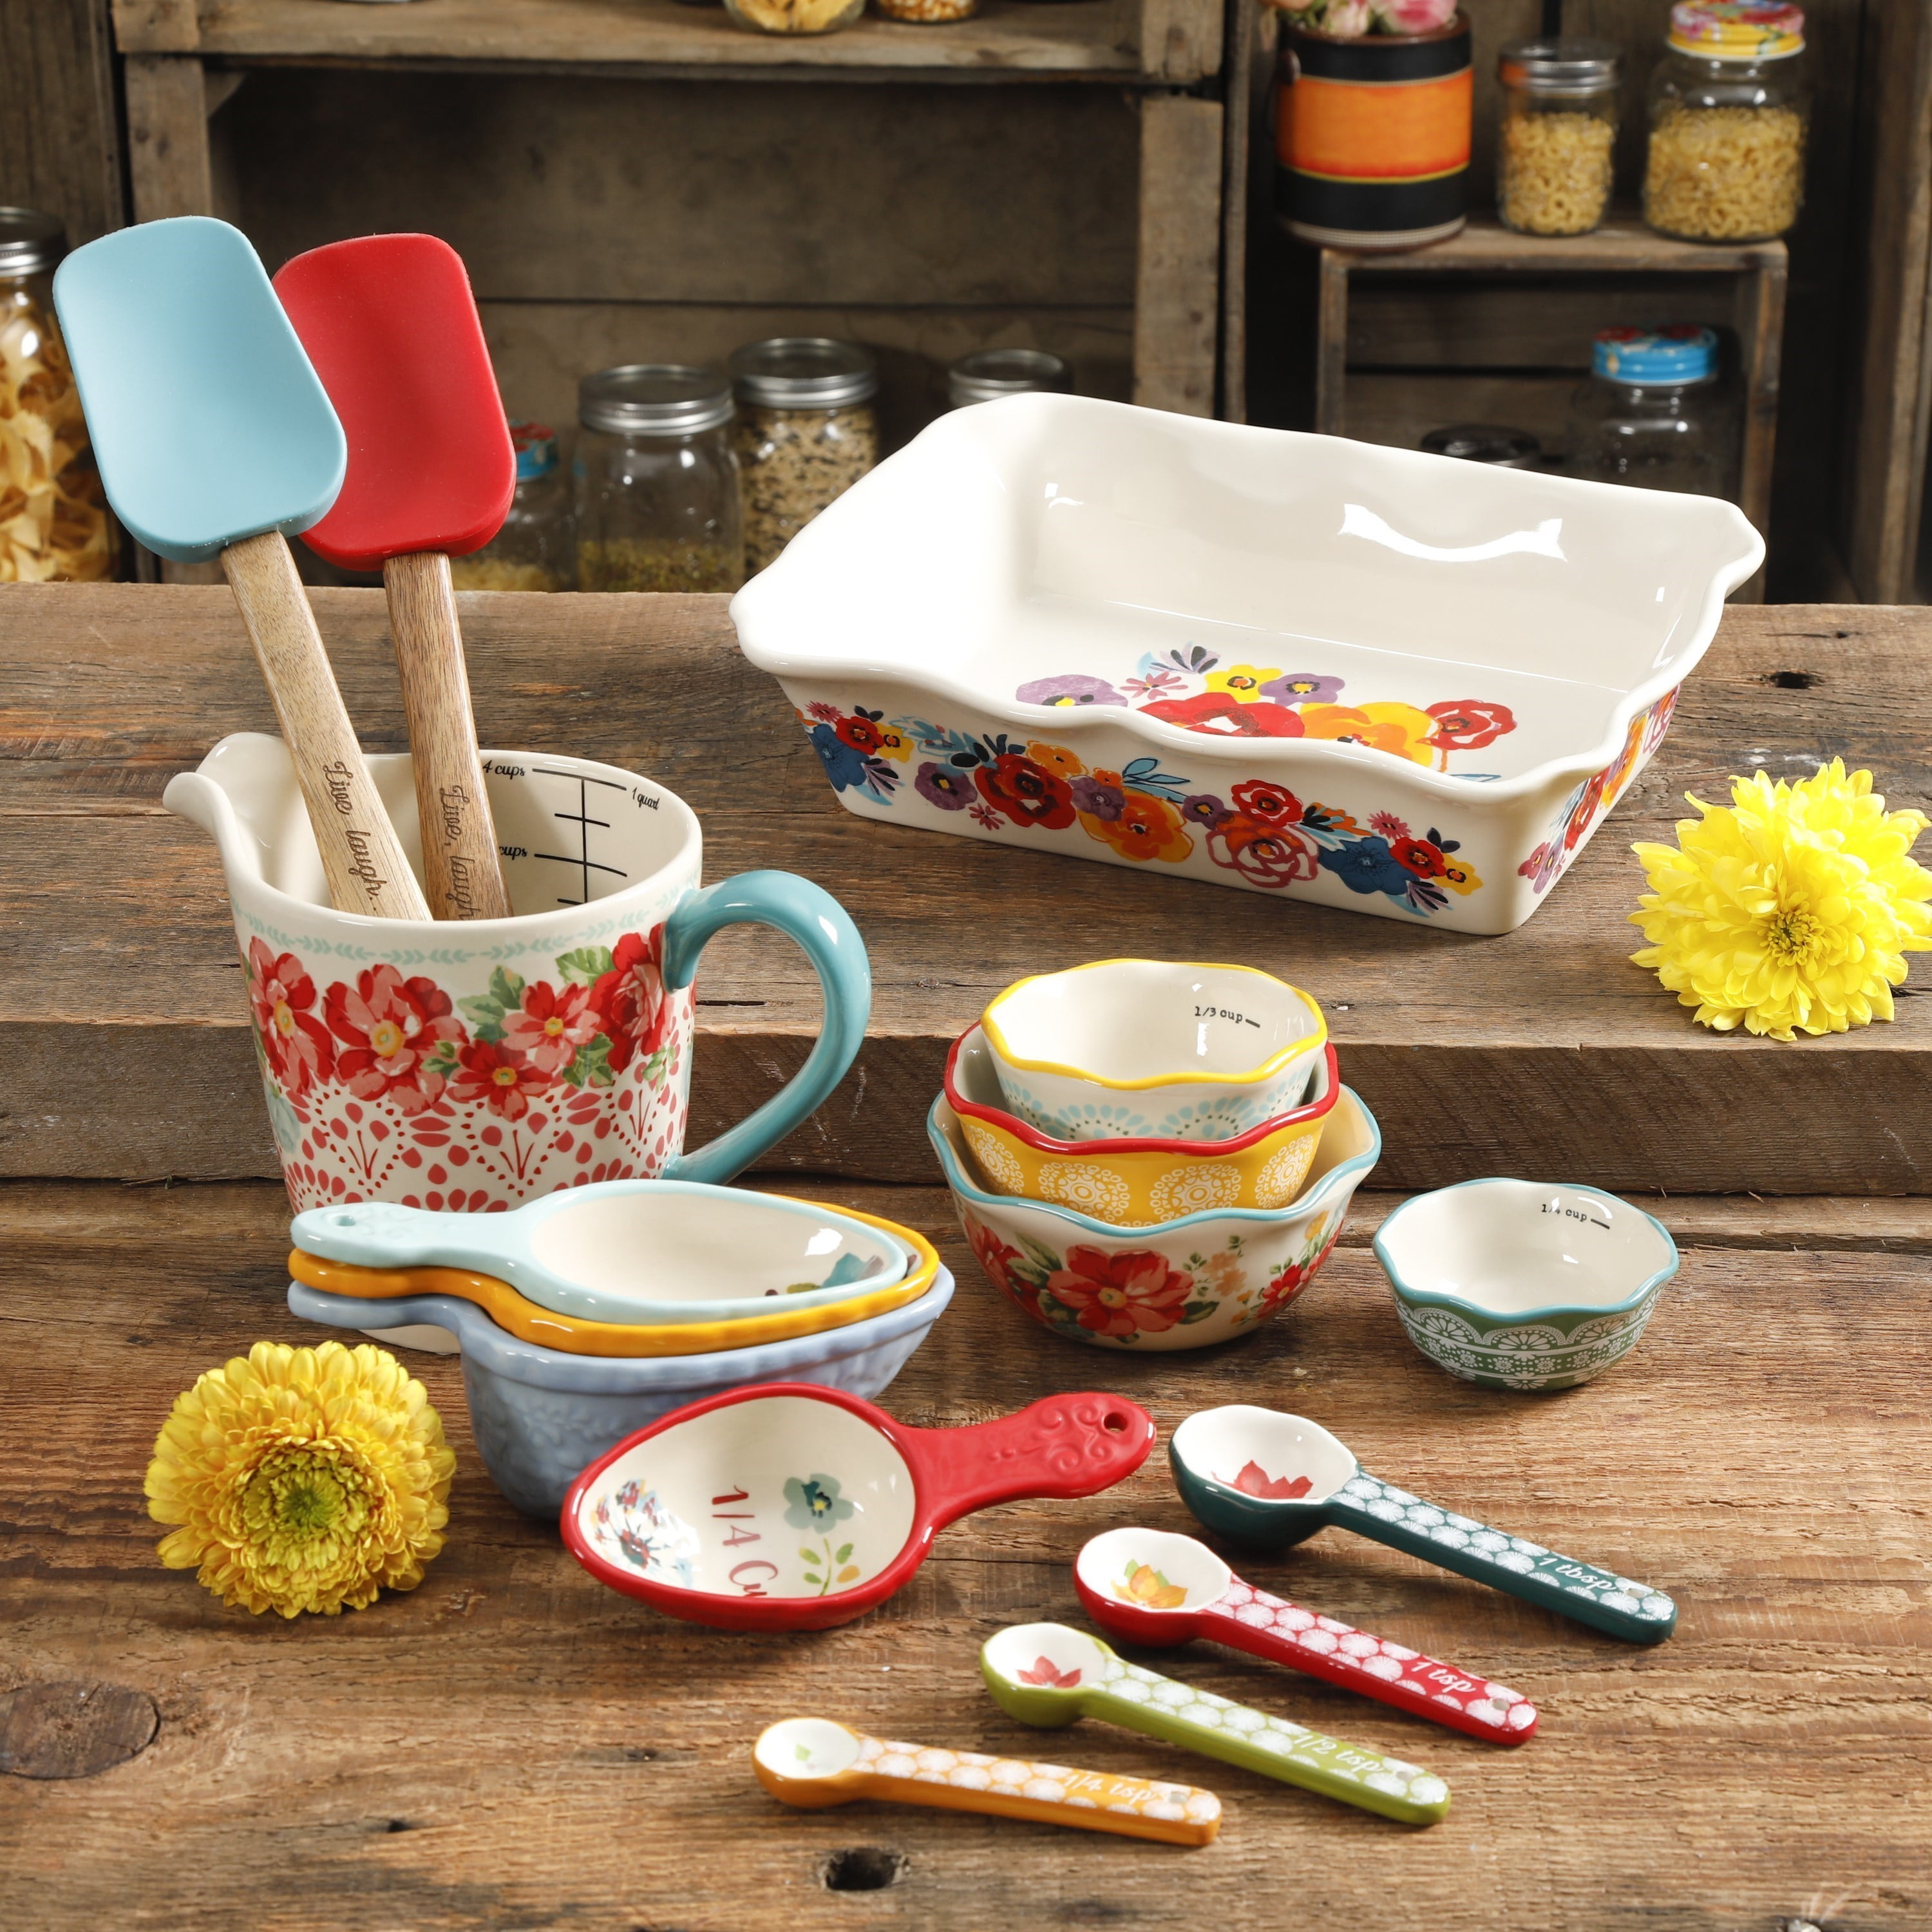 Details about   New Pioneer Woman 2-Piece Rectangular Ruffle Top Ceramic Bakeware Set Multicolor 